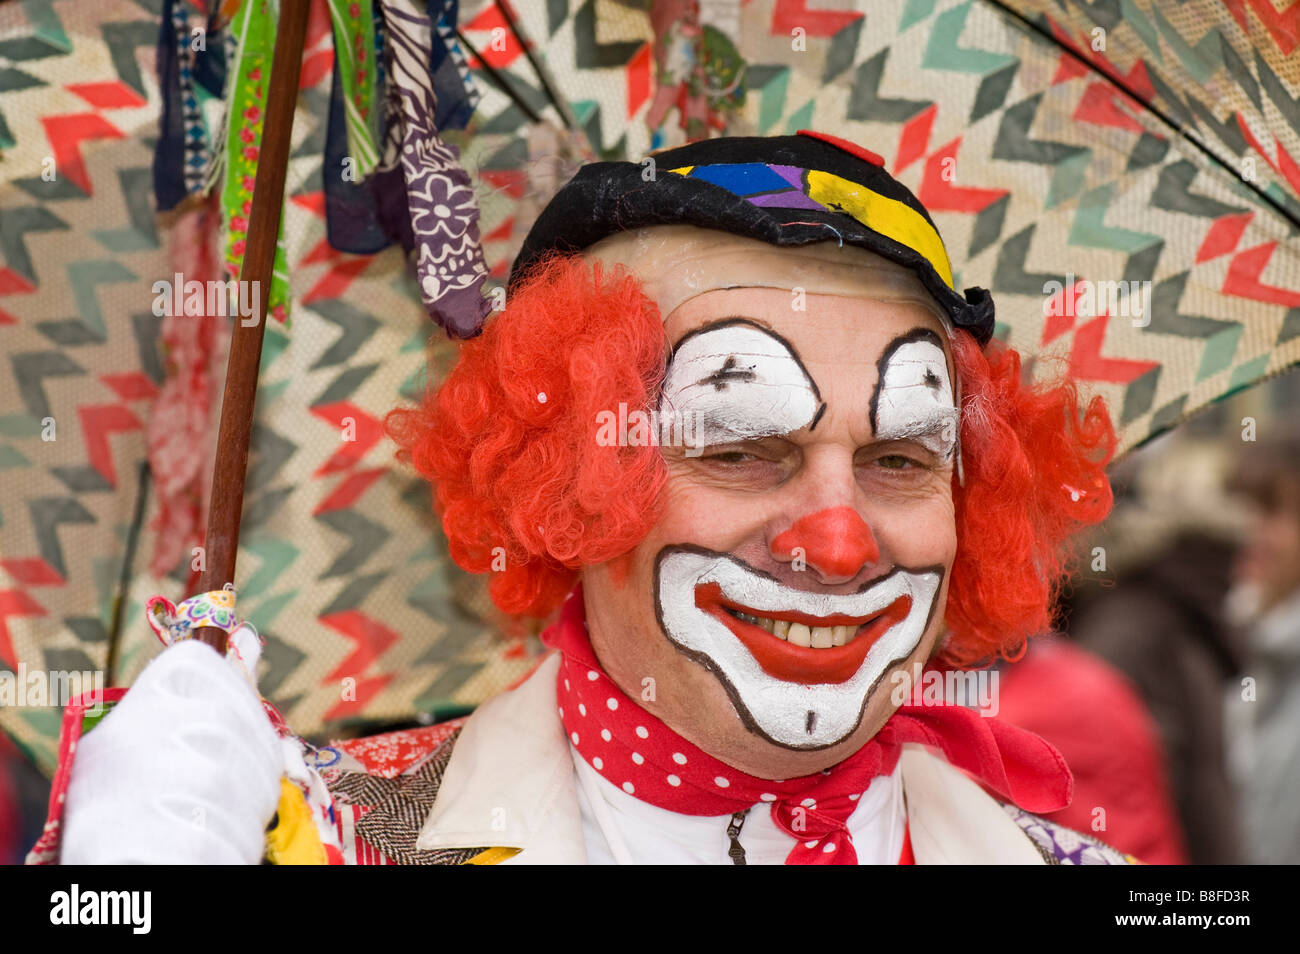 Fool in his costume with umbrella during carnival in Germany Stock Photo